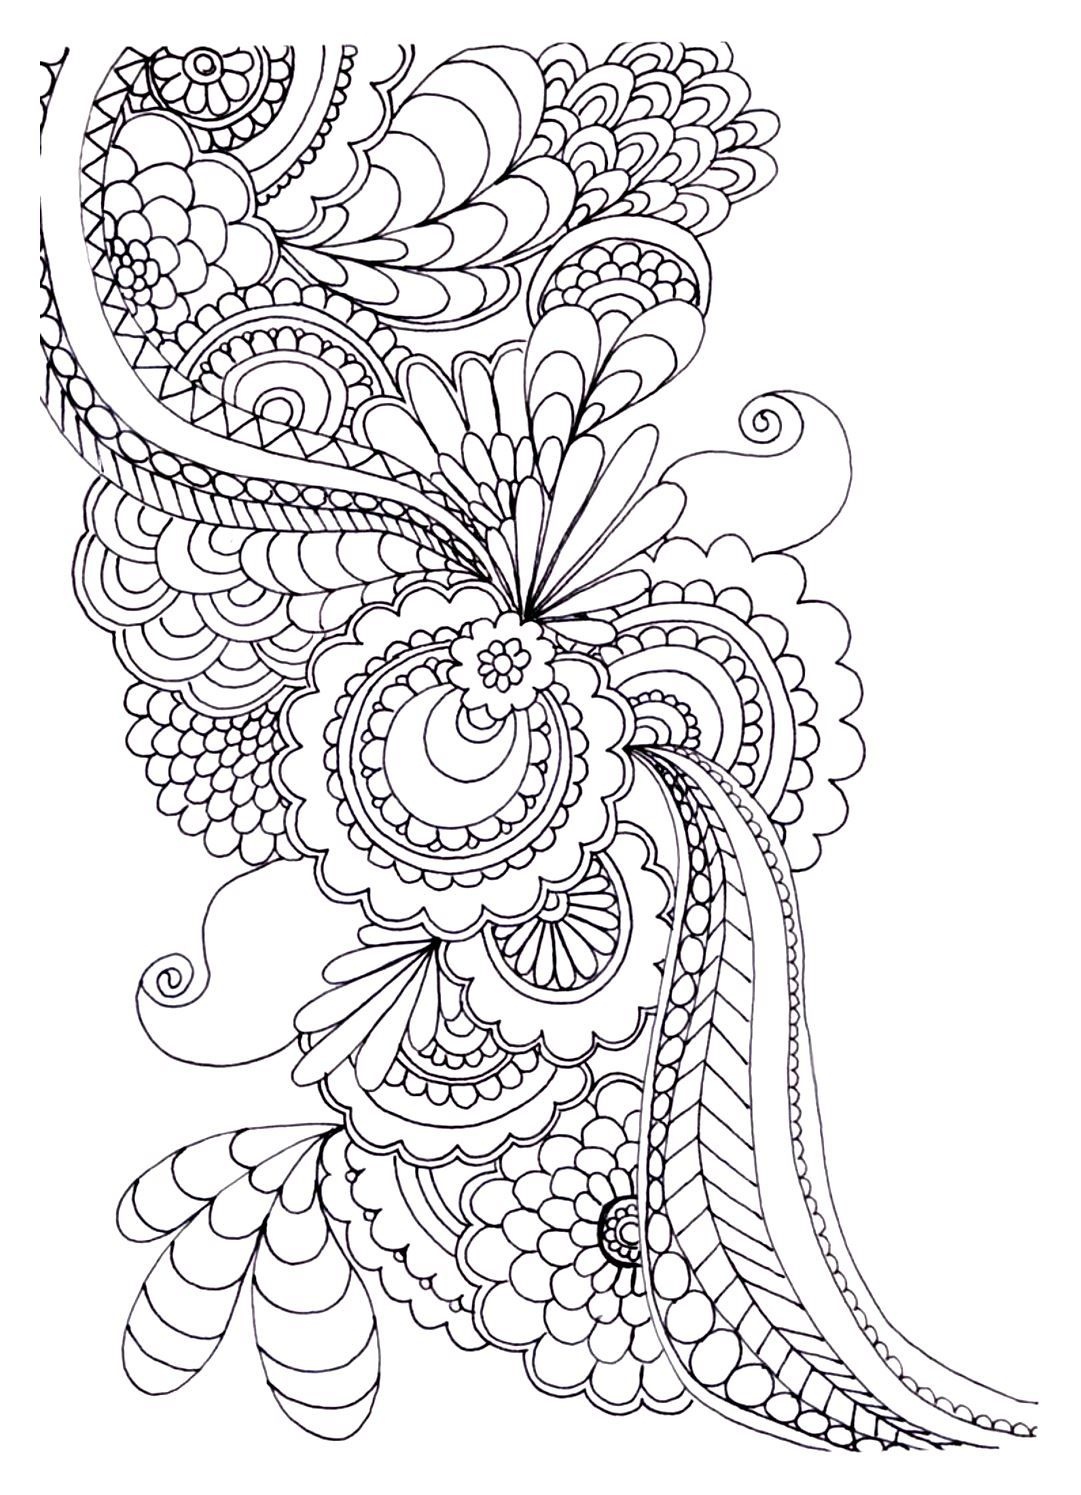 To Print This Free Coloring Page «Coloring-Adult-Zen-Anti-Stress-To - Free Printable Flower Coloring Pages For Adults